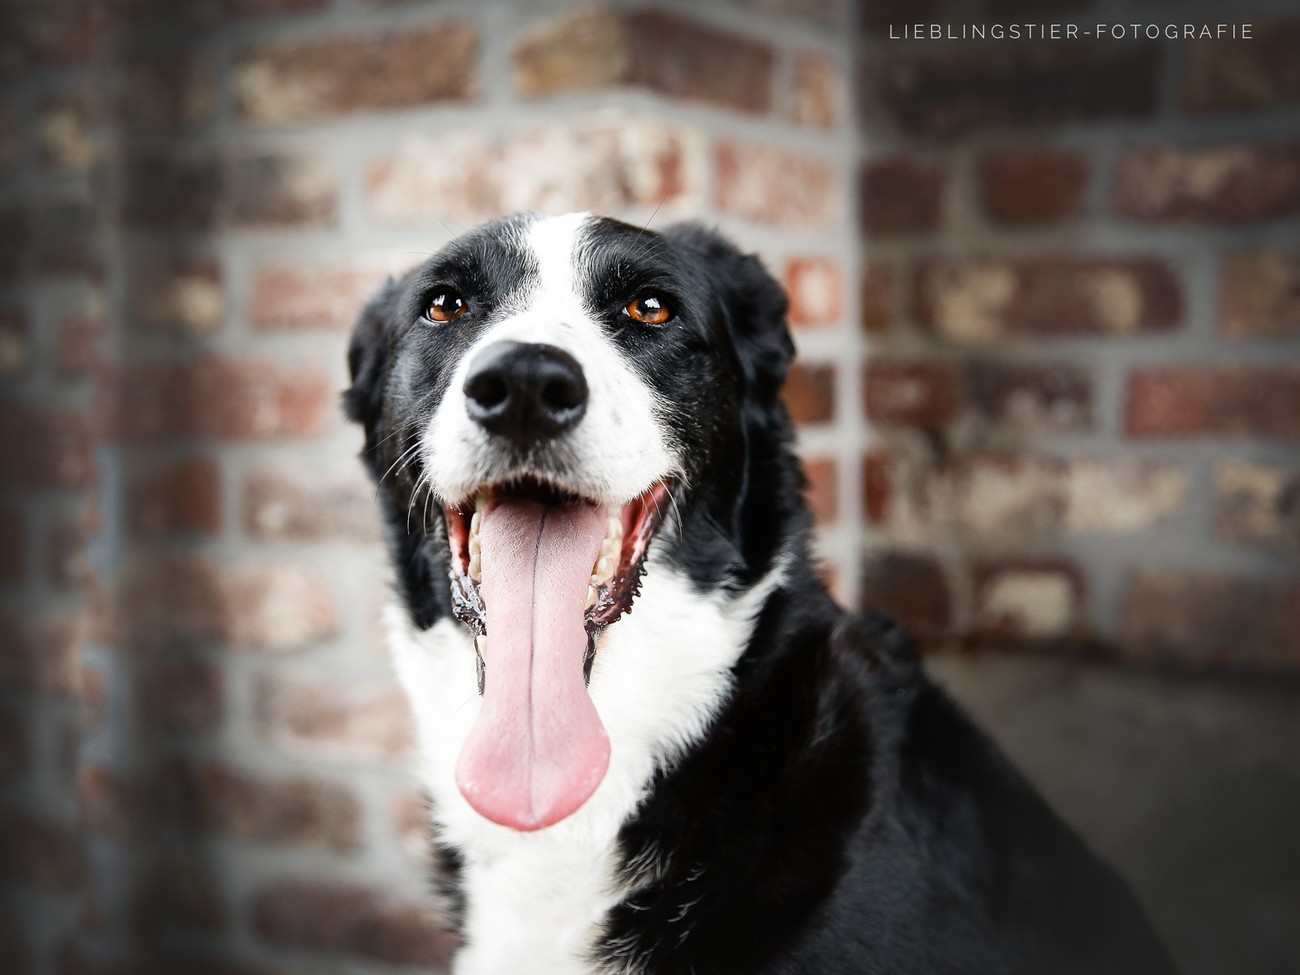 How To Shoot An Awesome Portrait Of Man's Best Friend